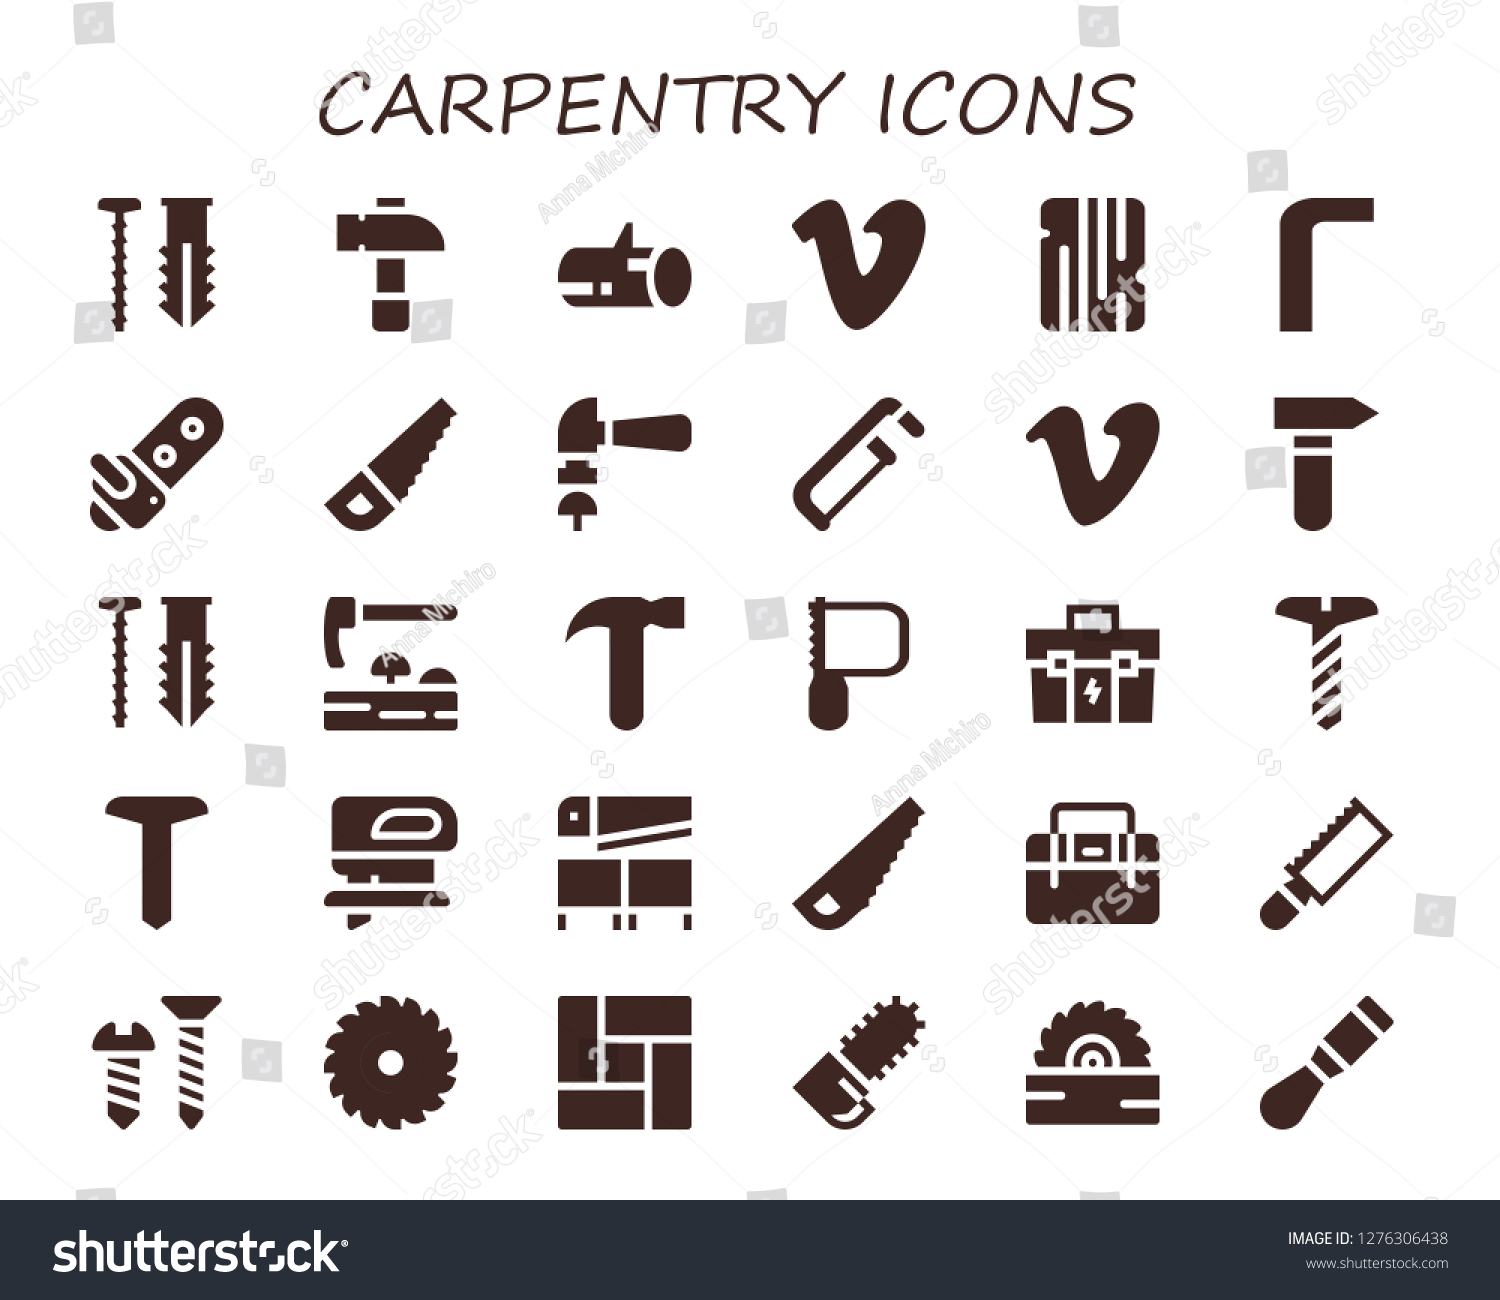 SVG of  carpentry icon set. 30 filled carpentry icons. Simple modern icons about  - Screw, Hammer, Wood, Vimeo, Allen keys, Chainsaw, Saw, Adze, Toolbox, Fretsaw, Floor, Chisel svg